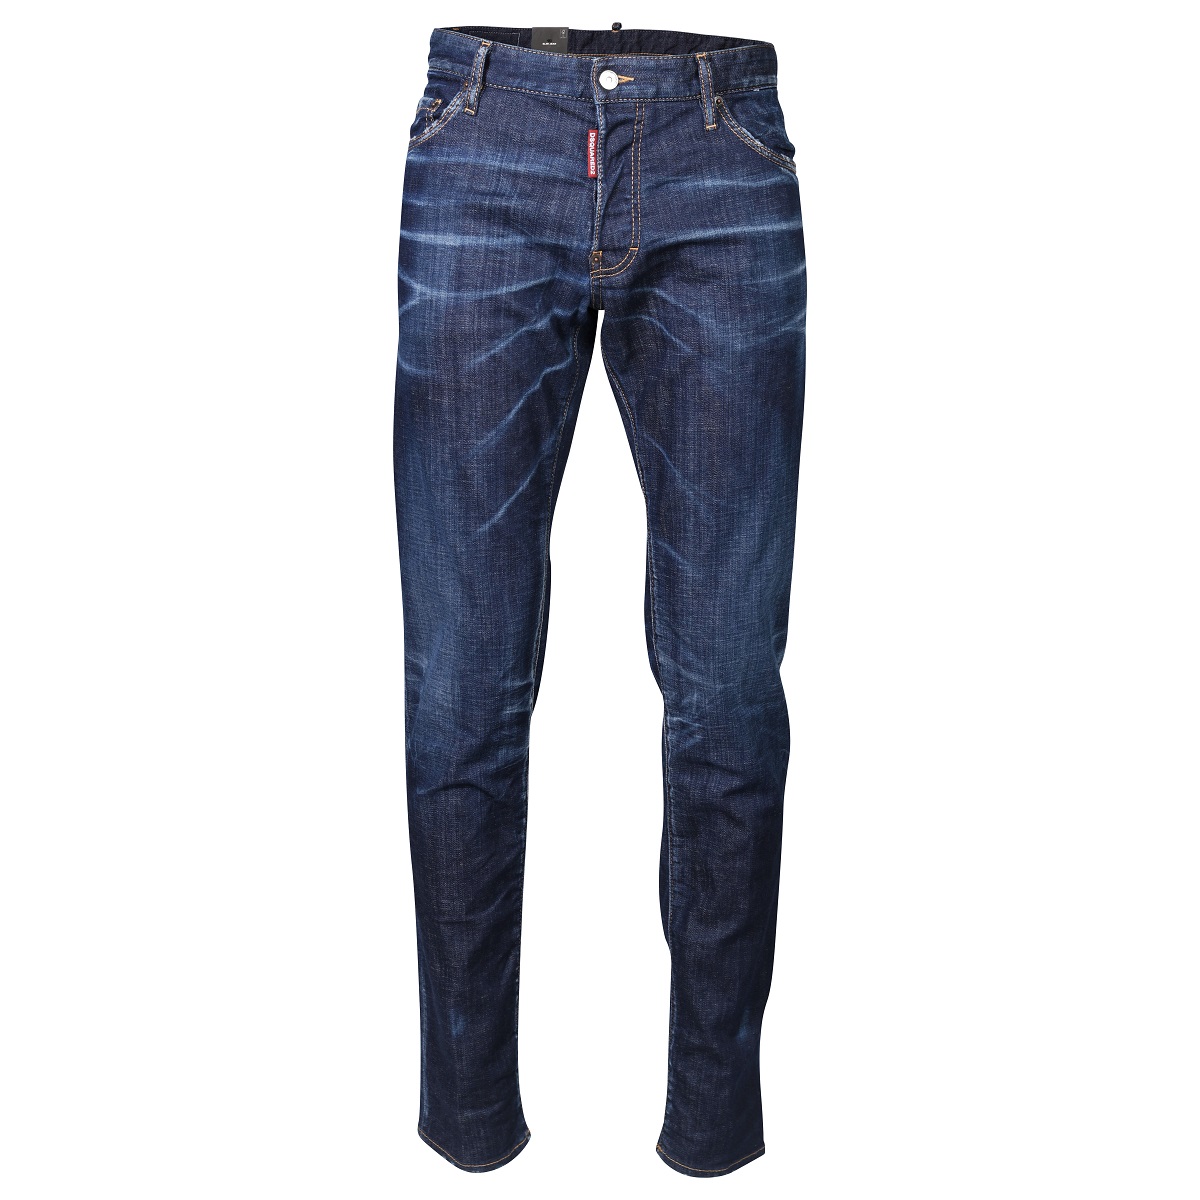 DSQUARED2 Jeans Slim in Washed Dark Blue 54